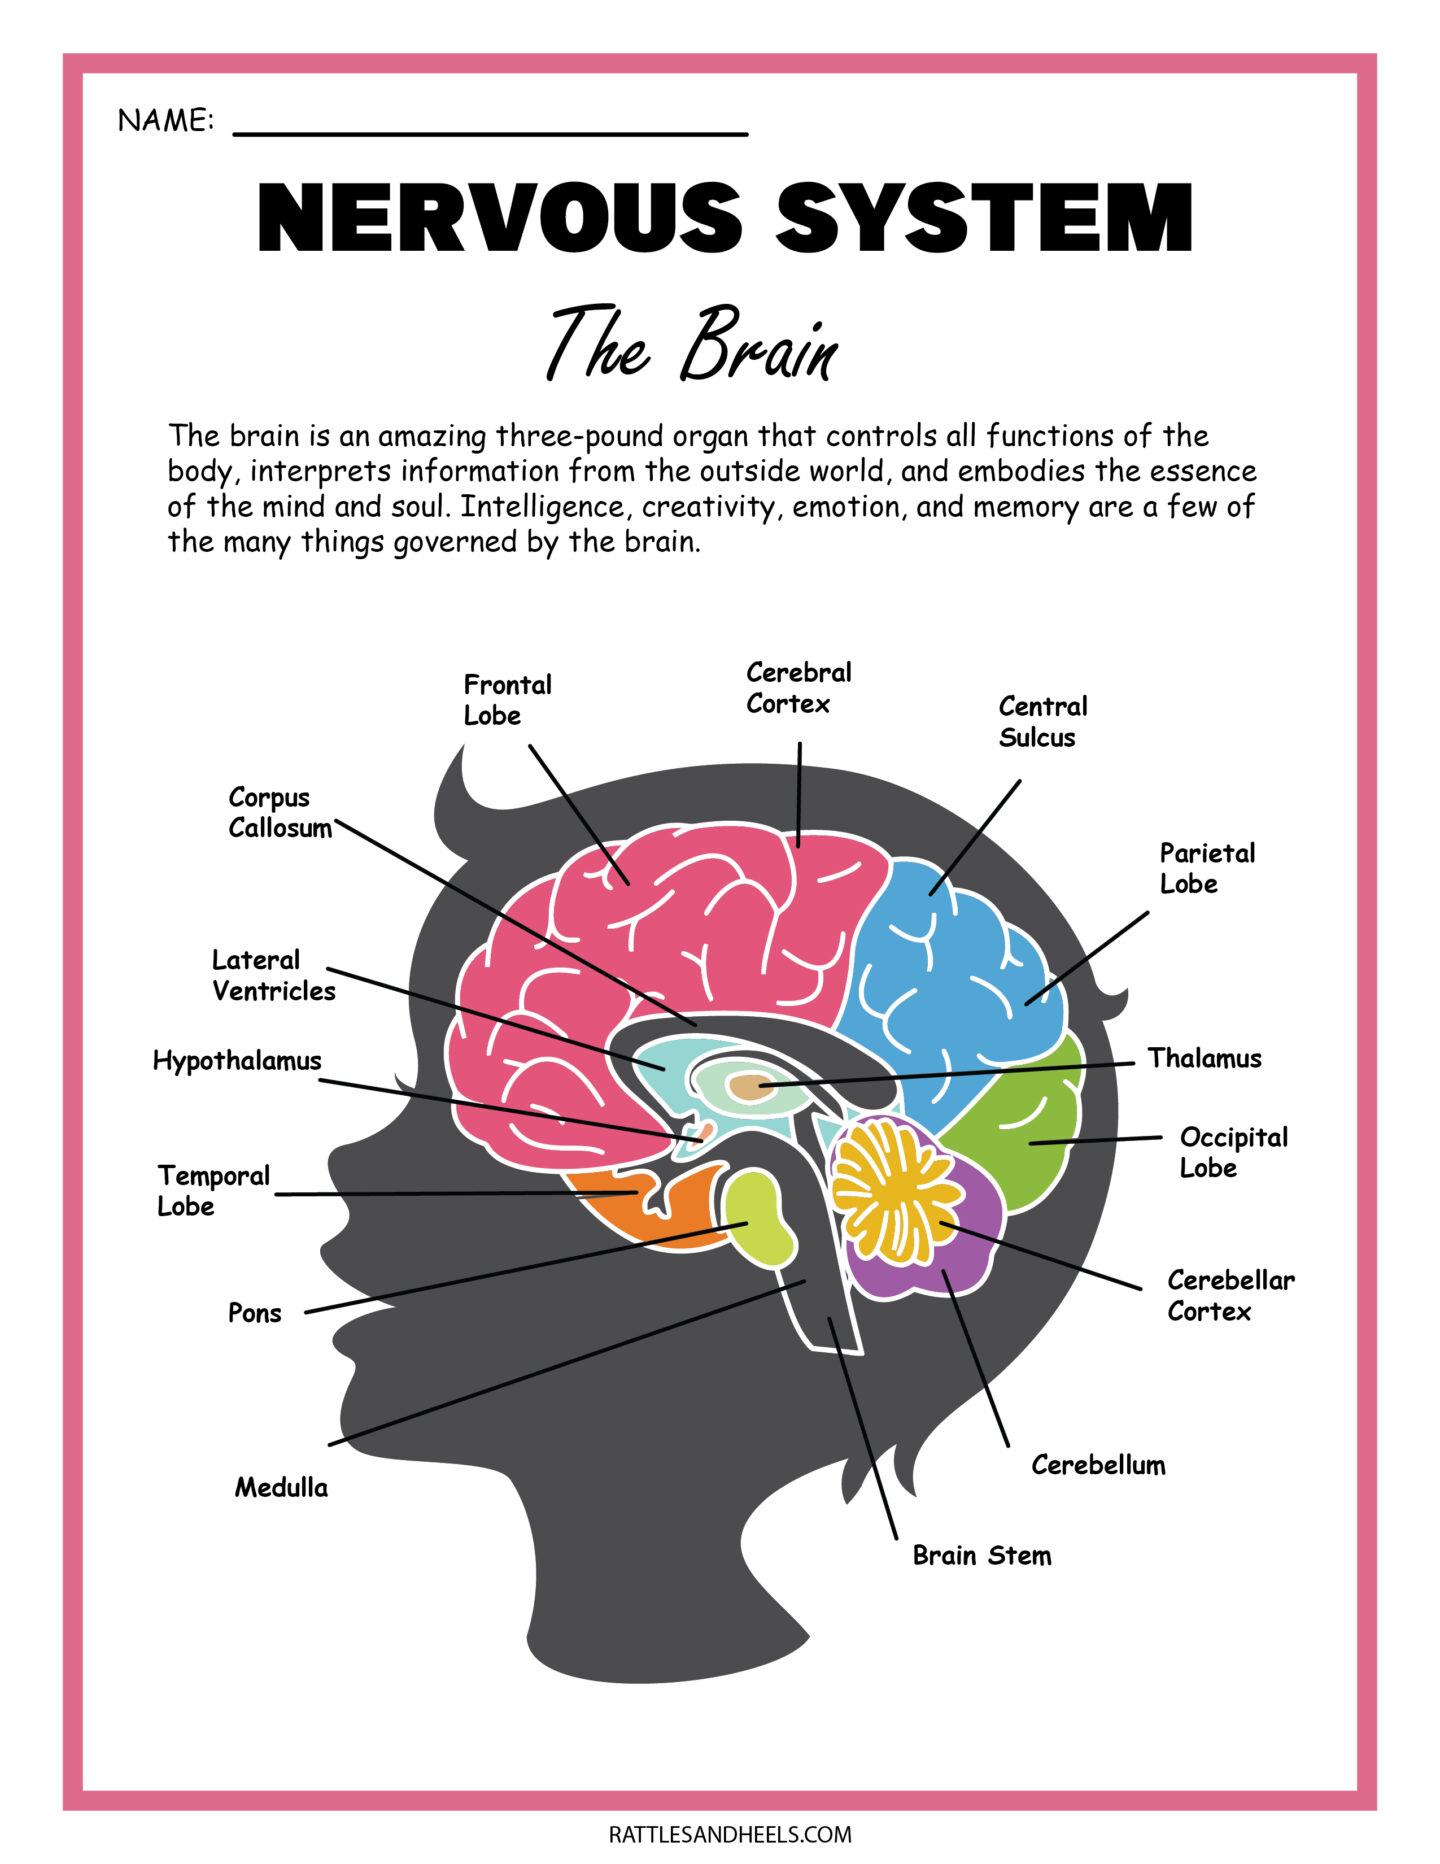 free-science-worksheets-the-nervous-system-adanna-dill